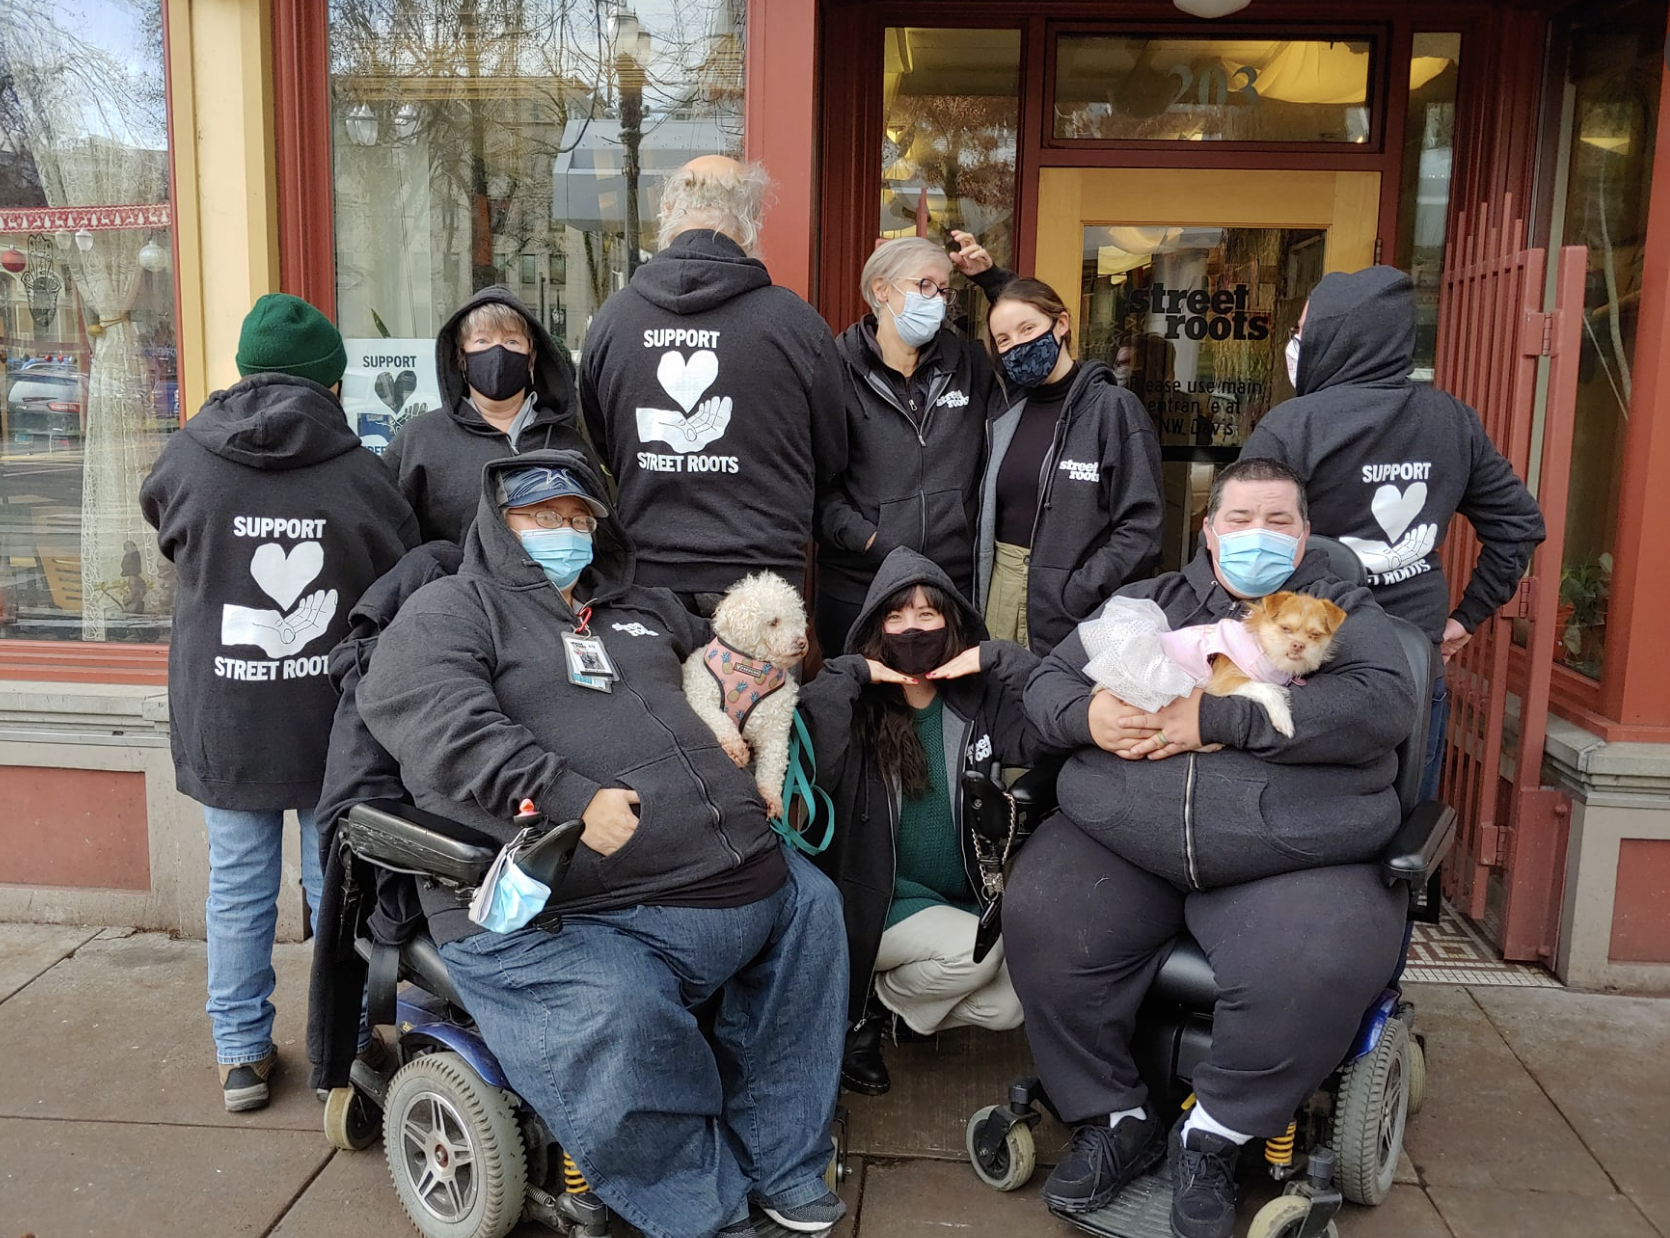 Street Roots team, in hoodies saying "support street roots," wearing masks, in front of a store front.